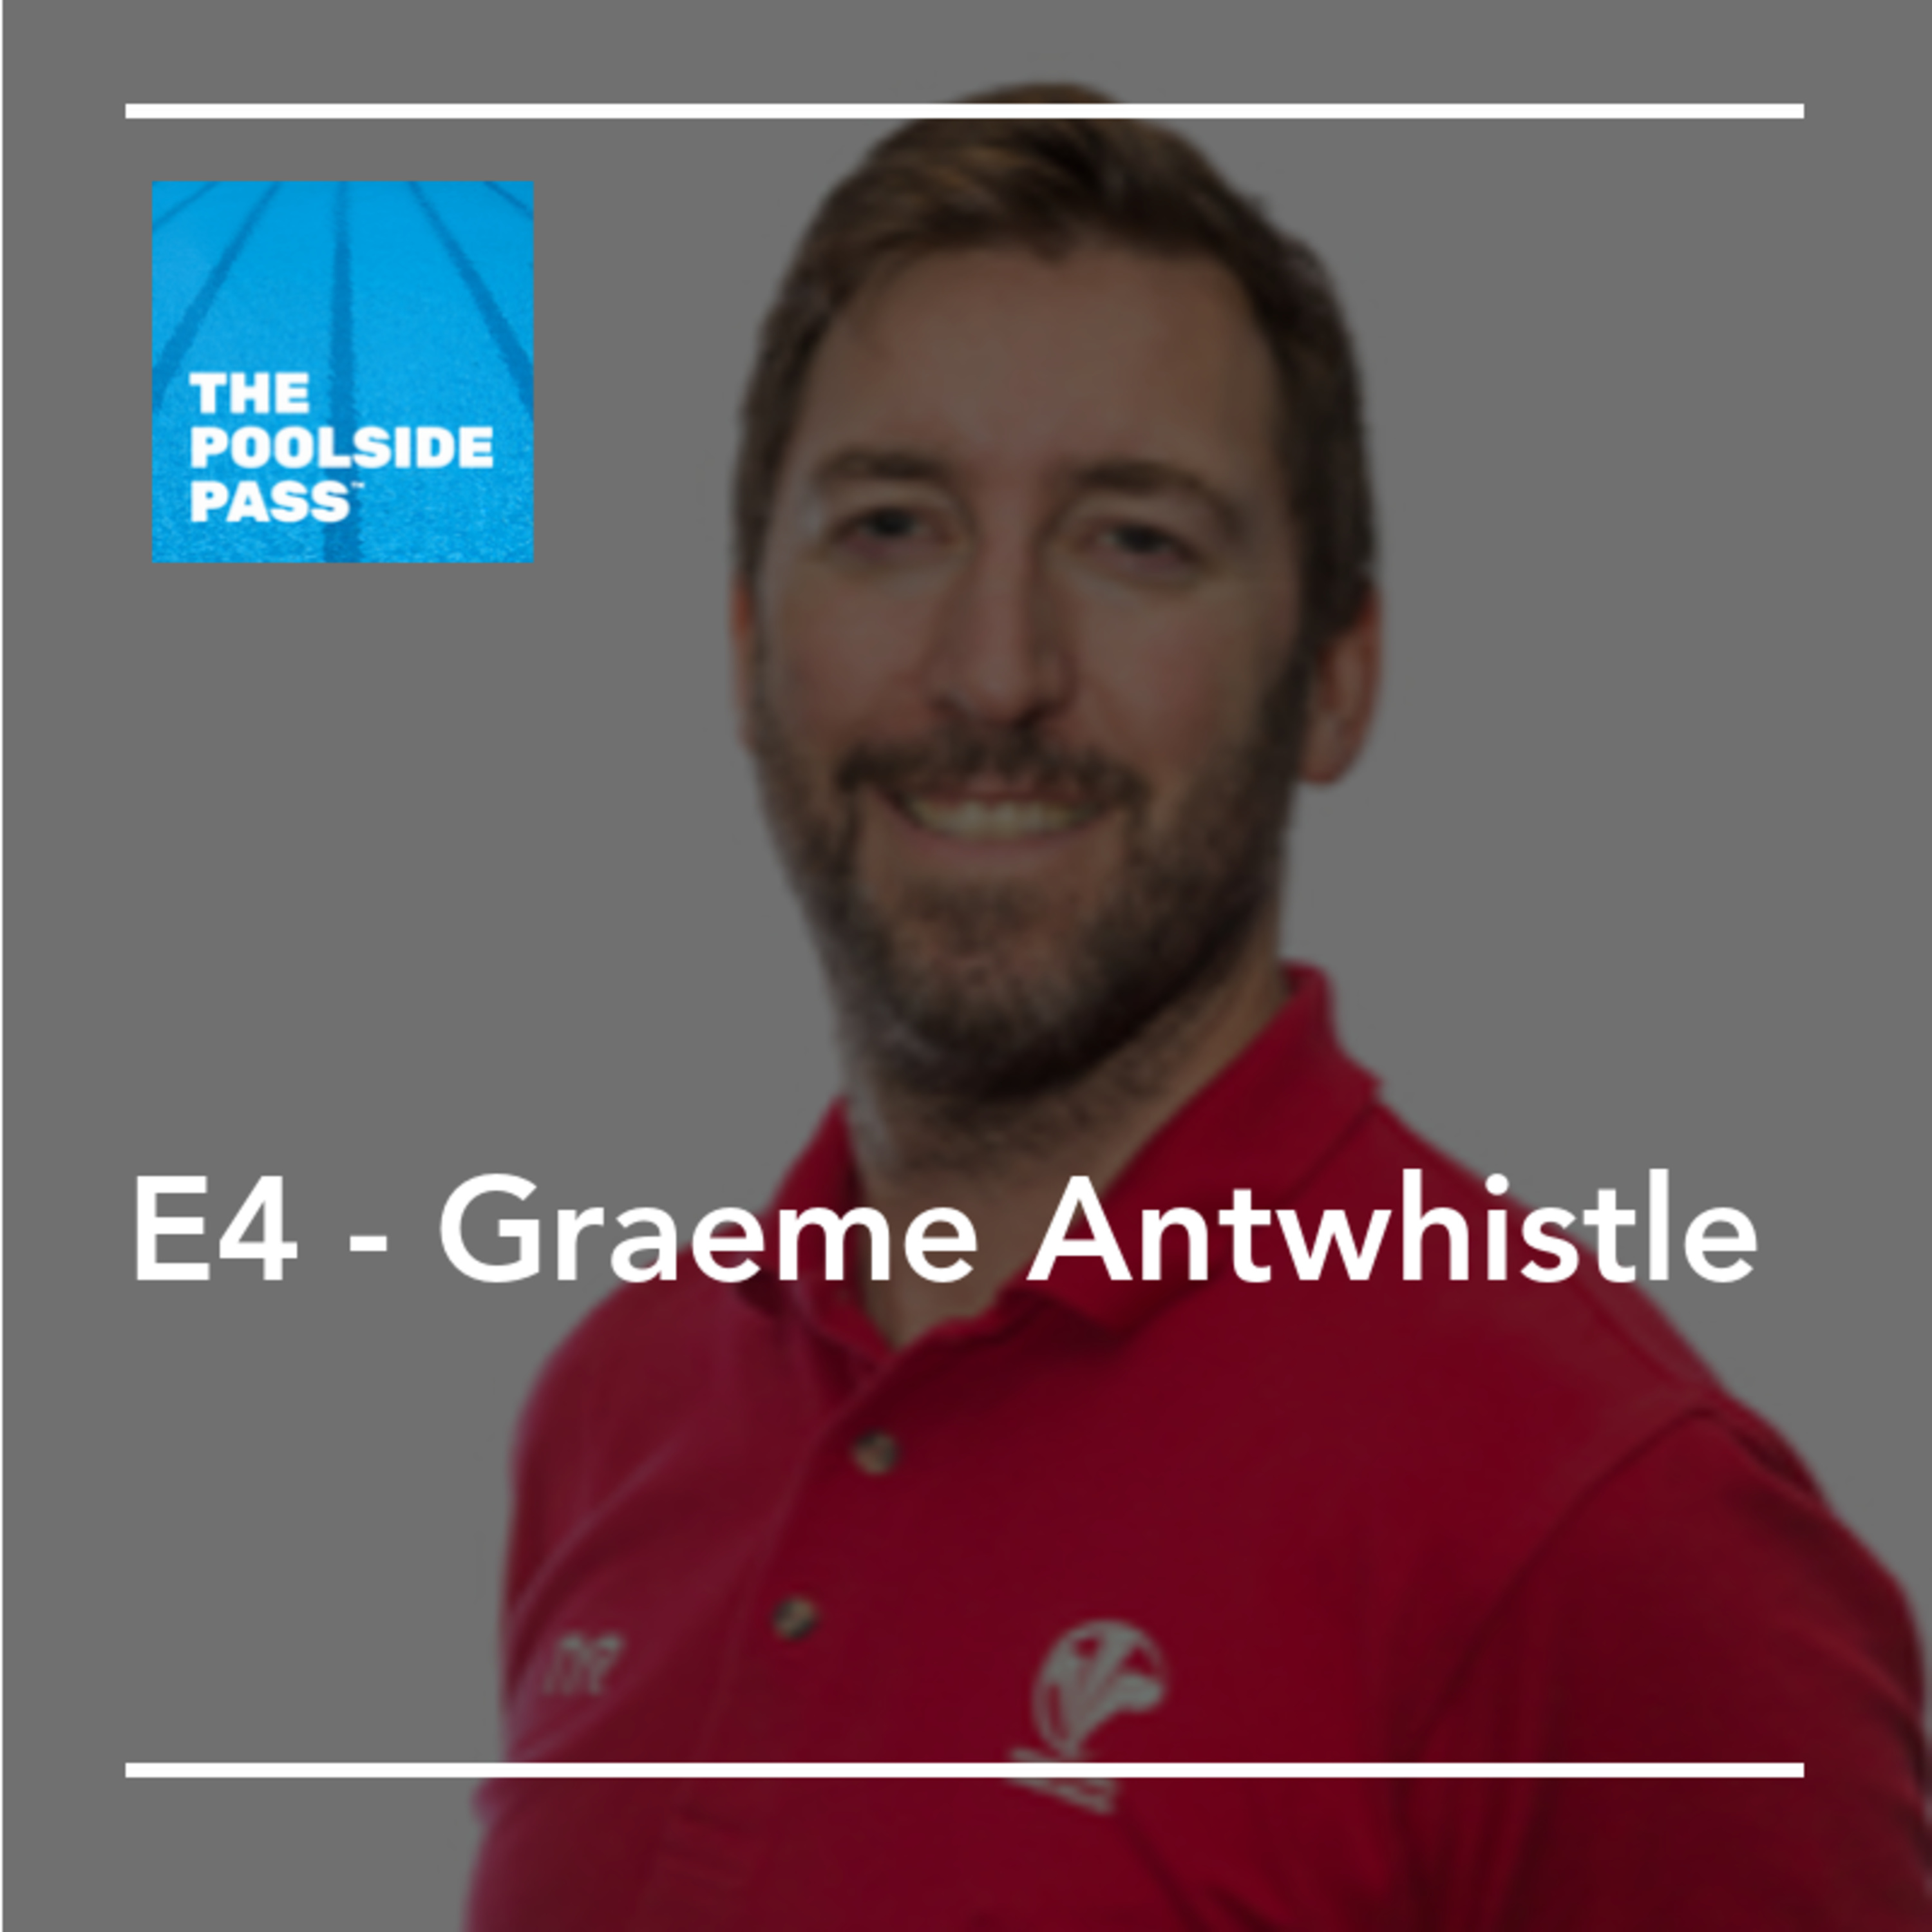 S3 E4 - Graeme Antwhistle (Put yourself out there to get better)